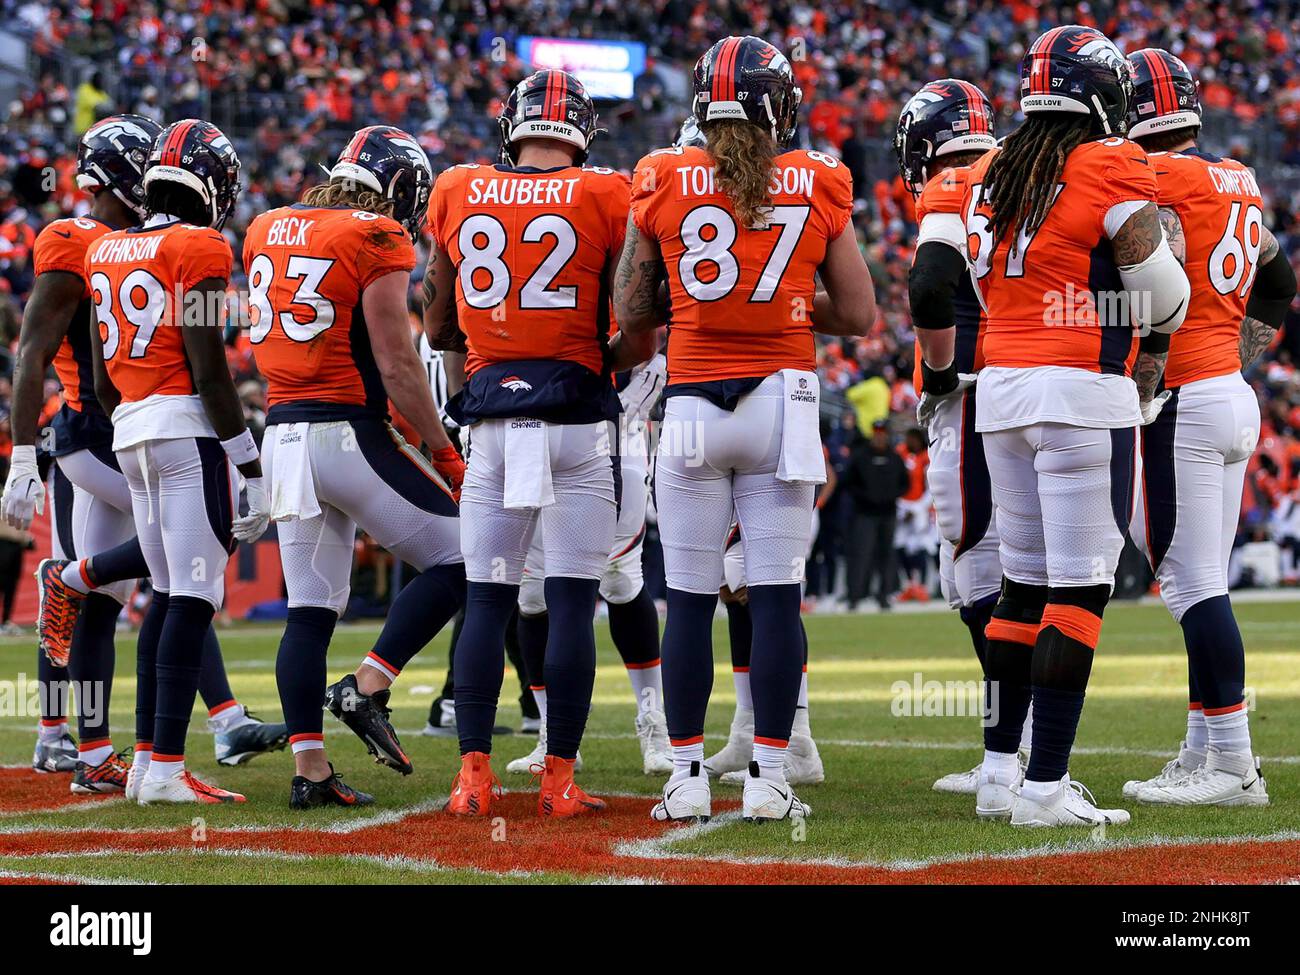 DENVER, CO - DECEMBER 18: The Denver Broncos offense gets ready for a play  during an NFL game between the Arizona Cardinals and the Denver Broncos on December  18, 2022 at Empower